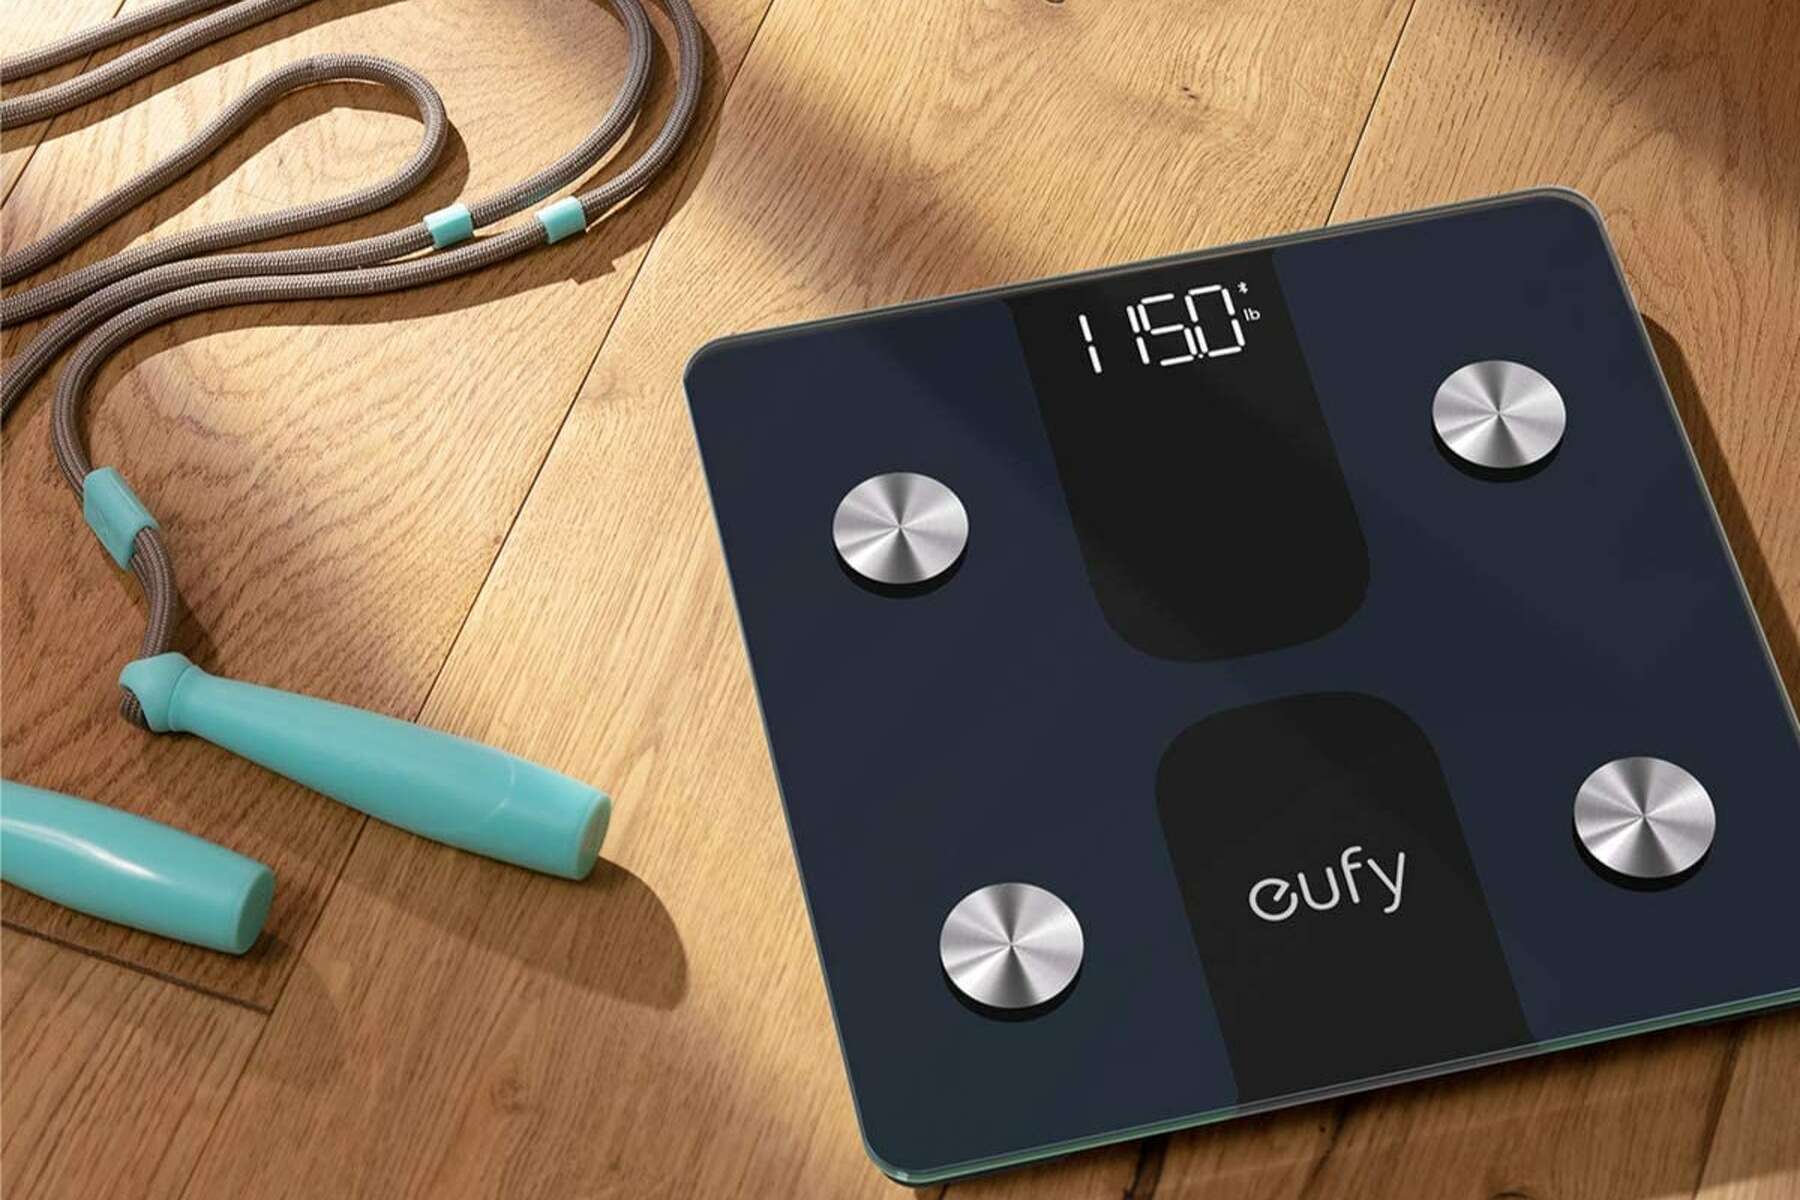 Eufy Smart Scale review